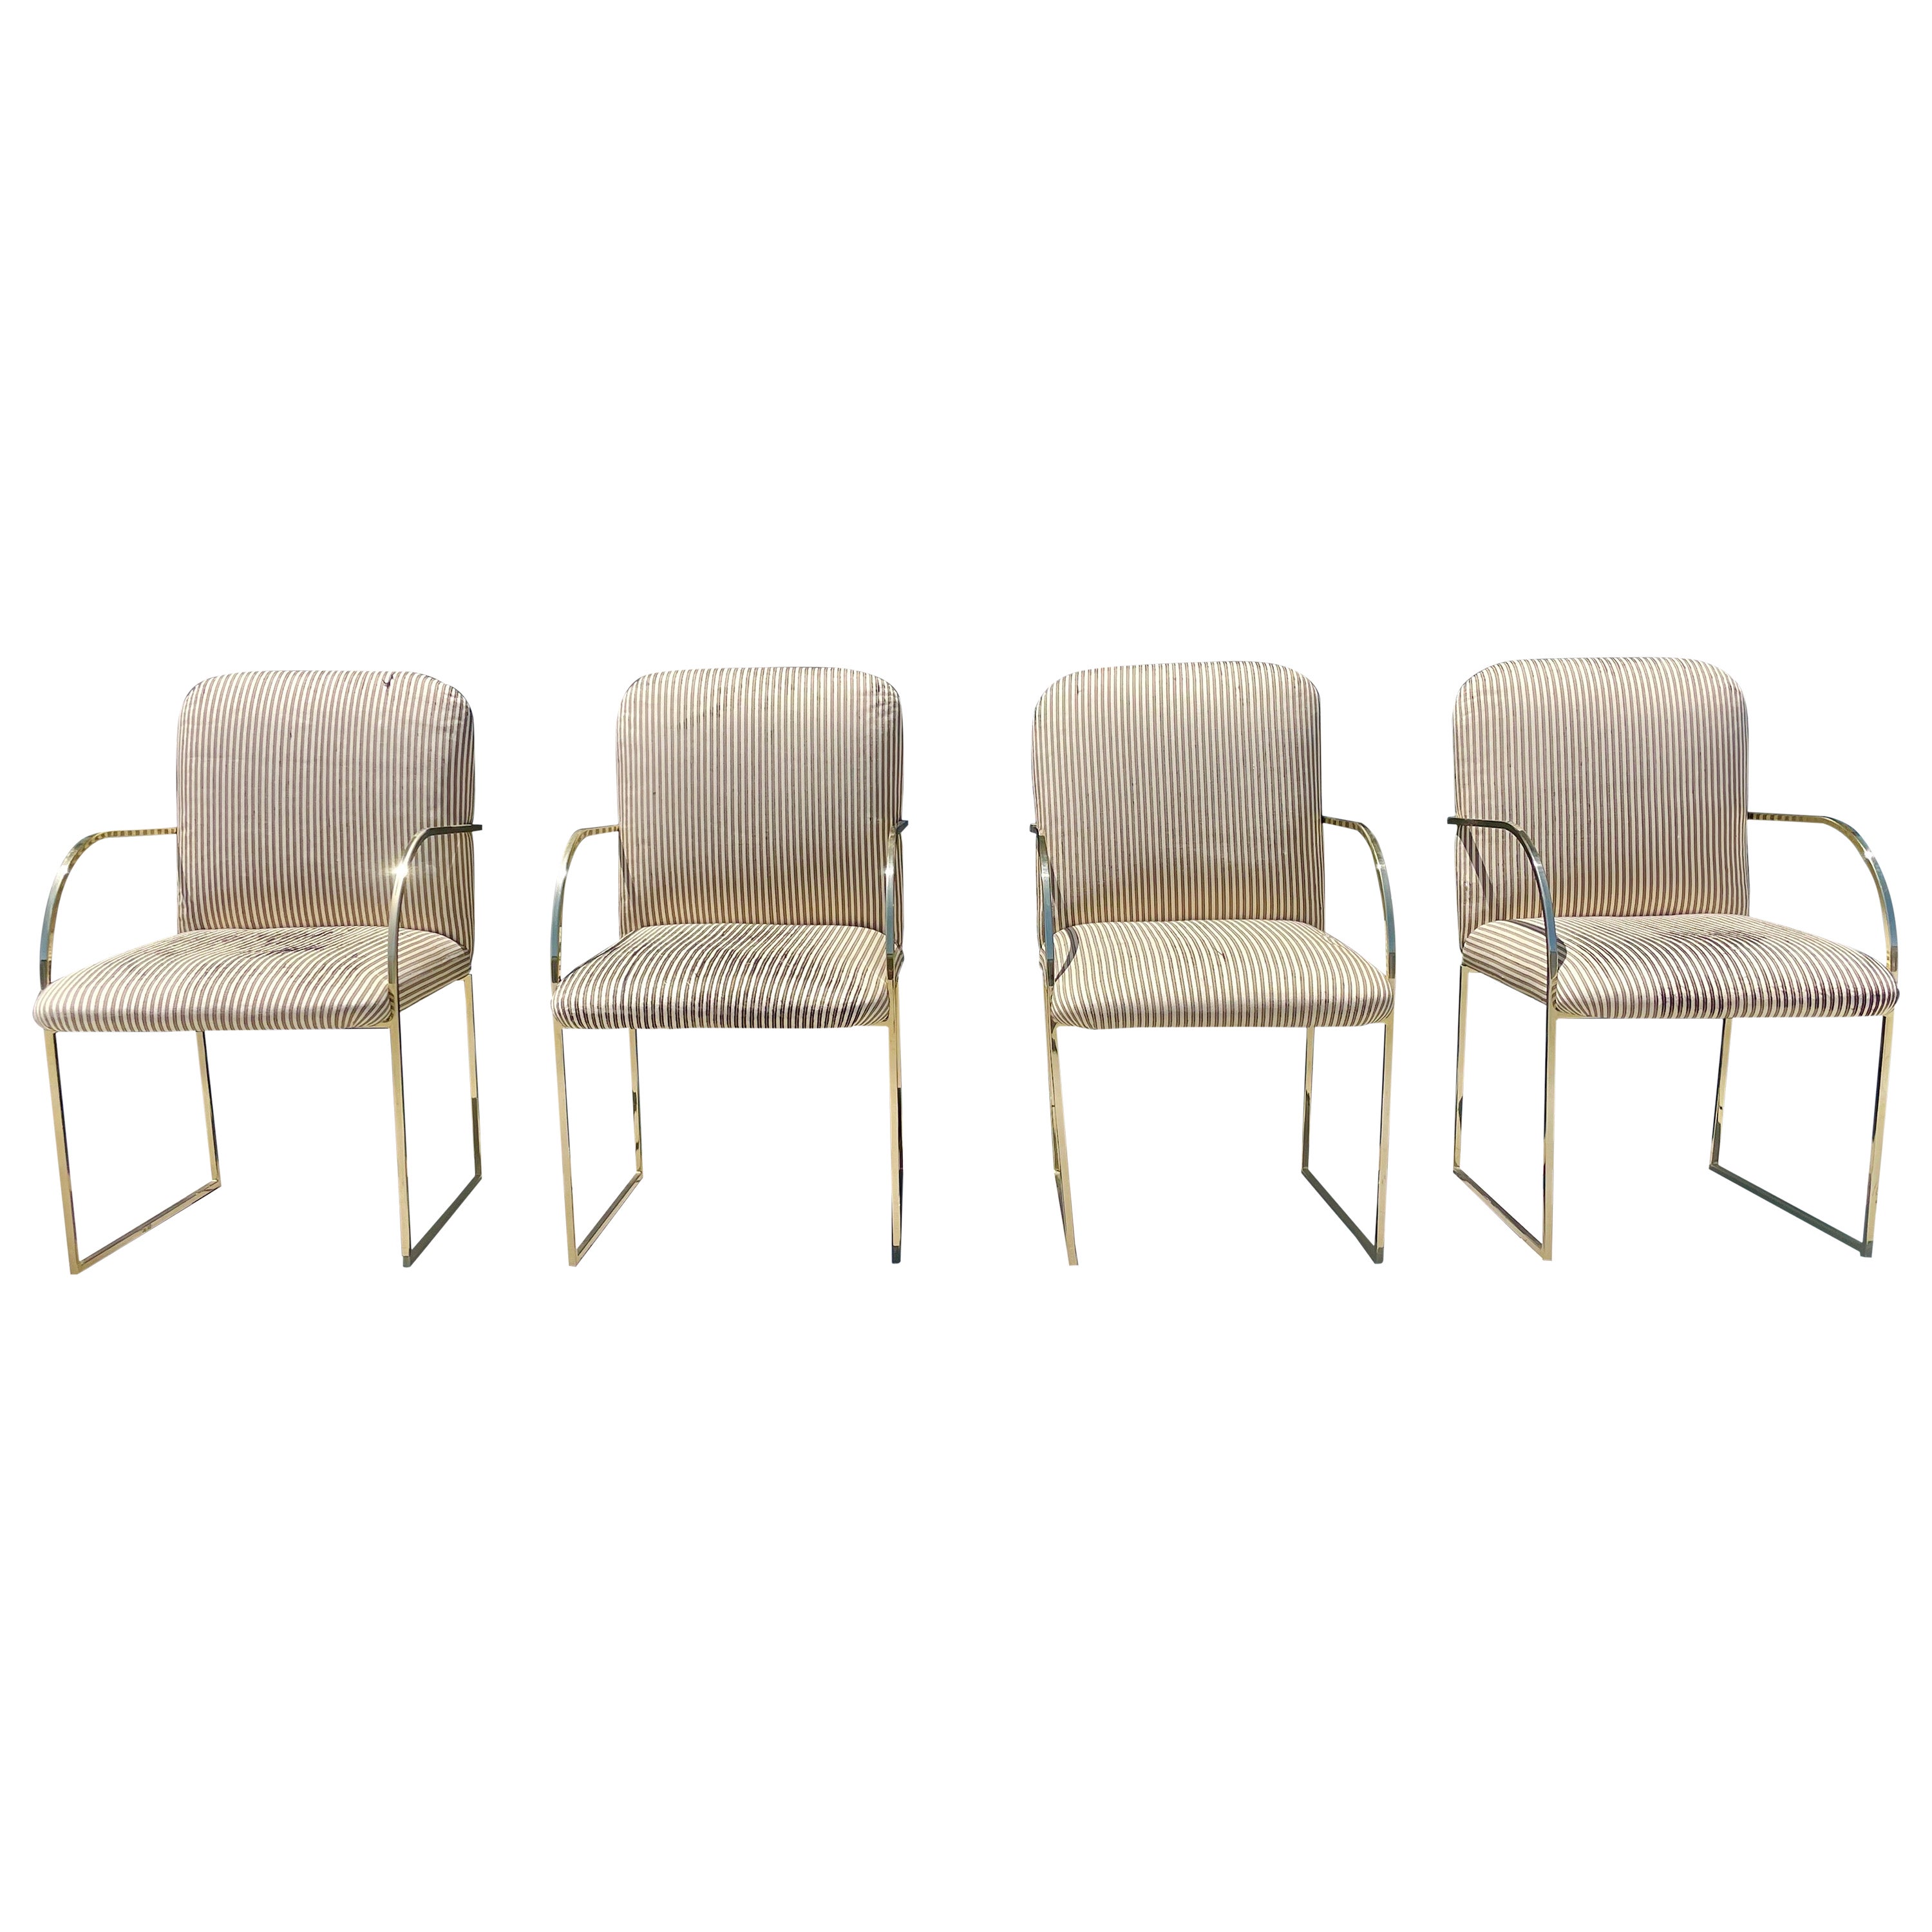 Hollywood Regency Brass Dining Chairs by Design Institute of America